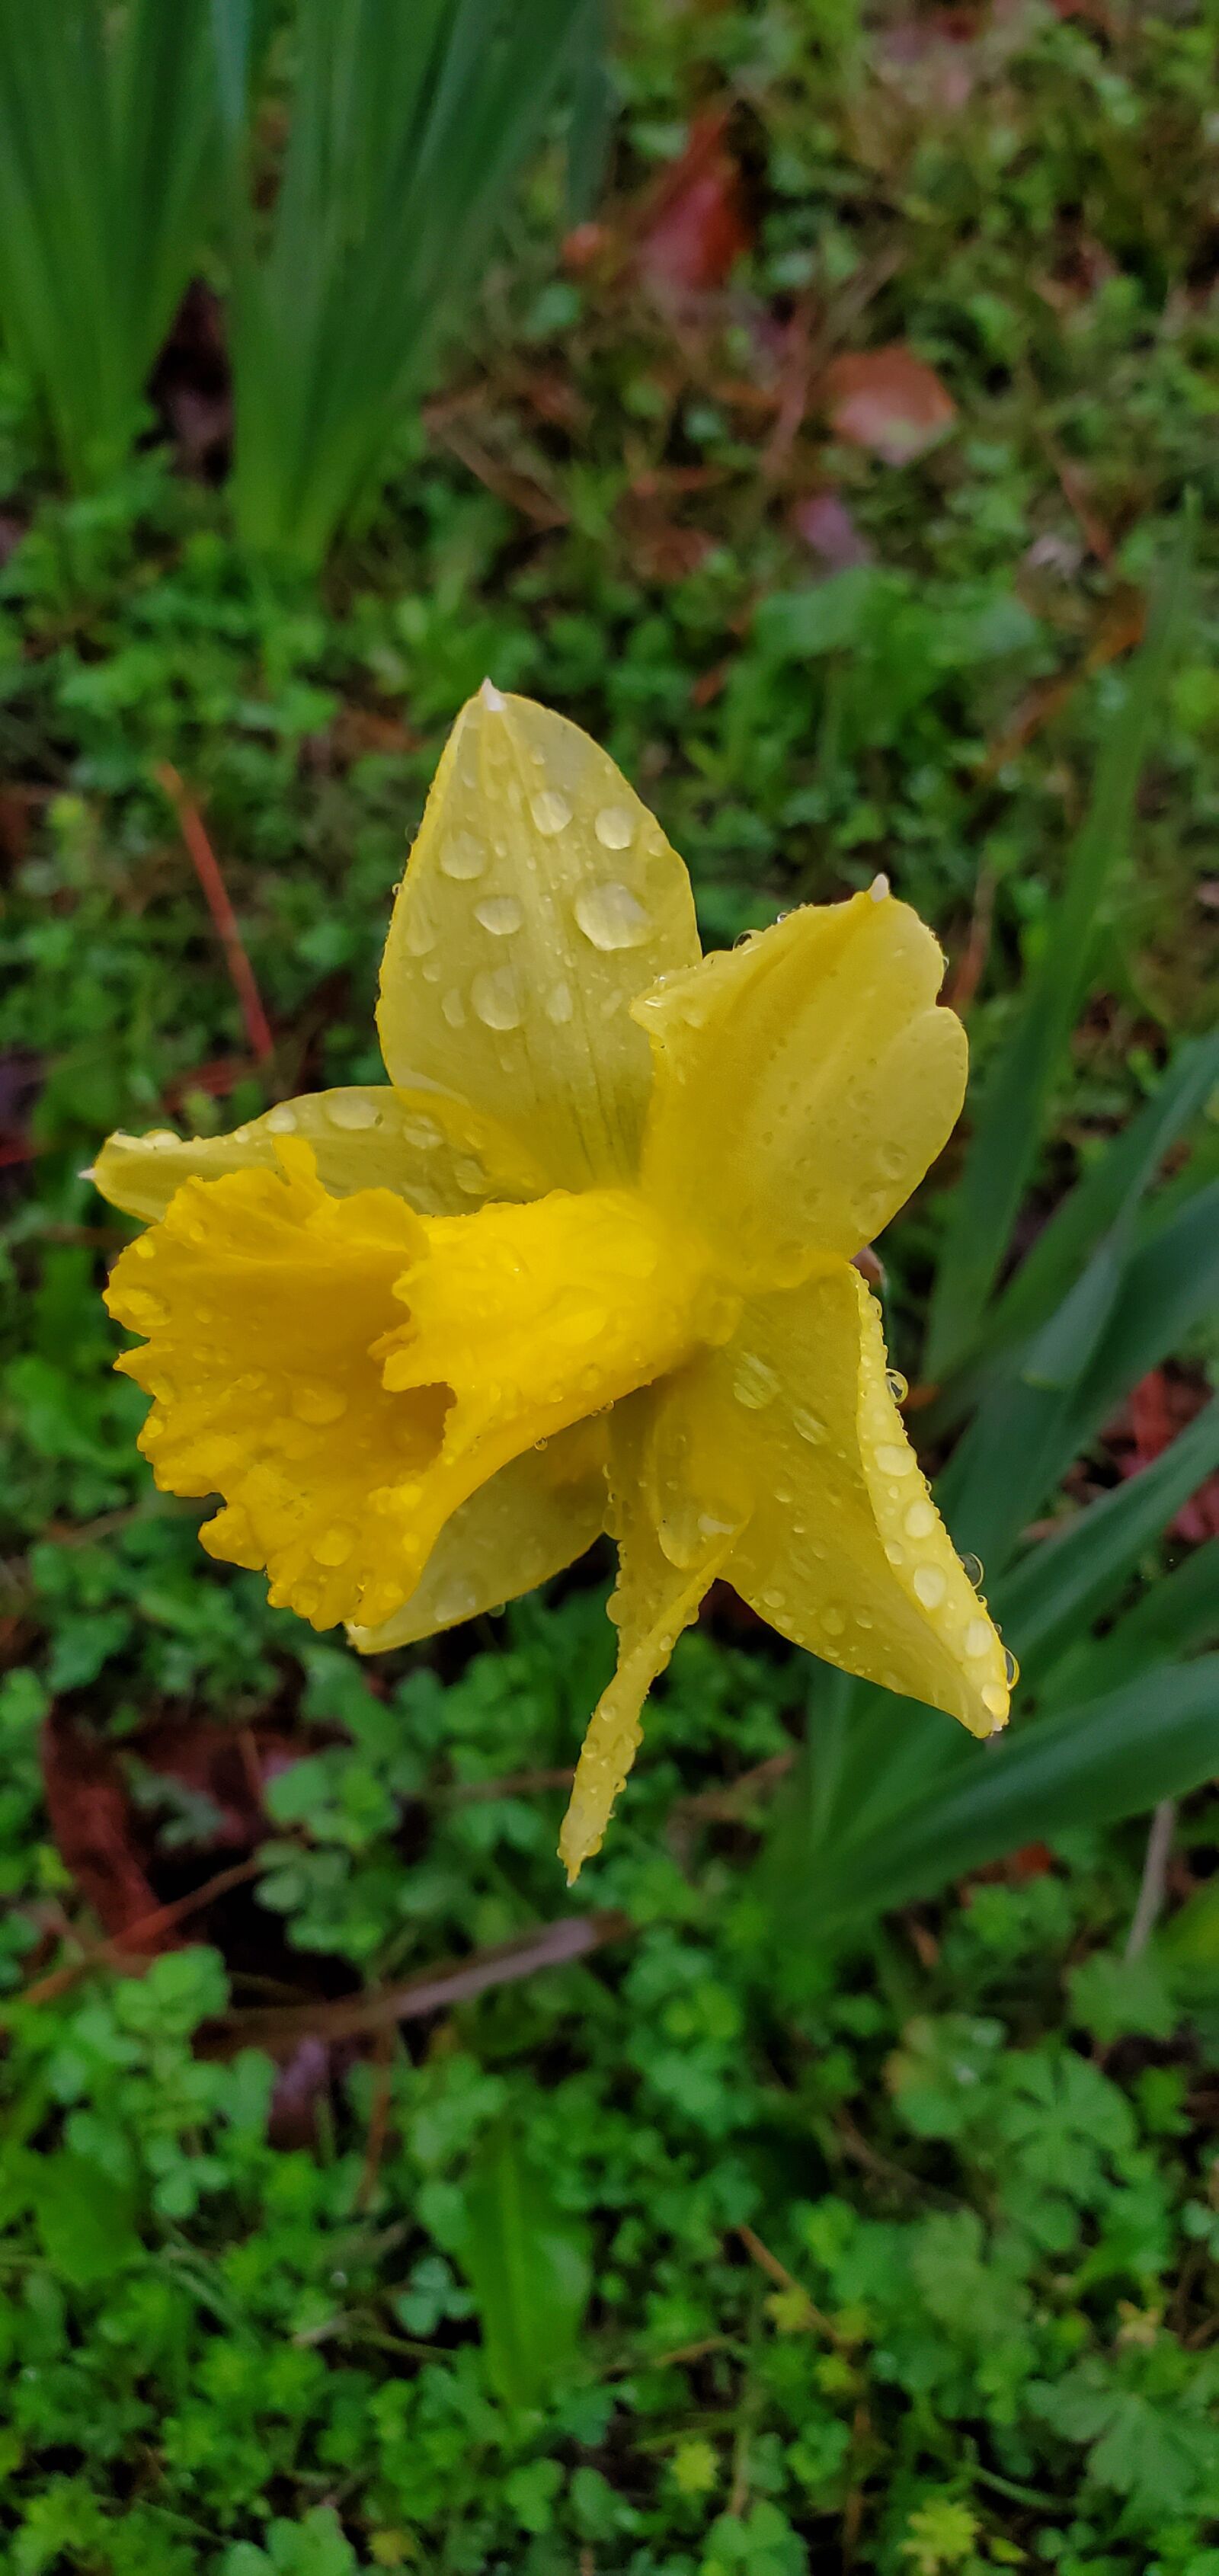 Samsung Galaxy S10e sample photo. Flower, dew, nature photography